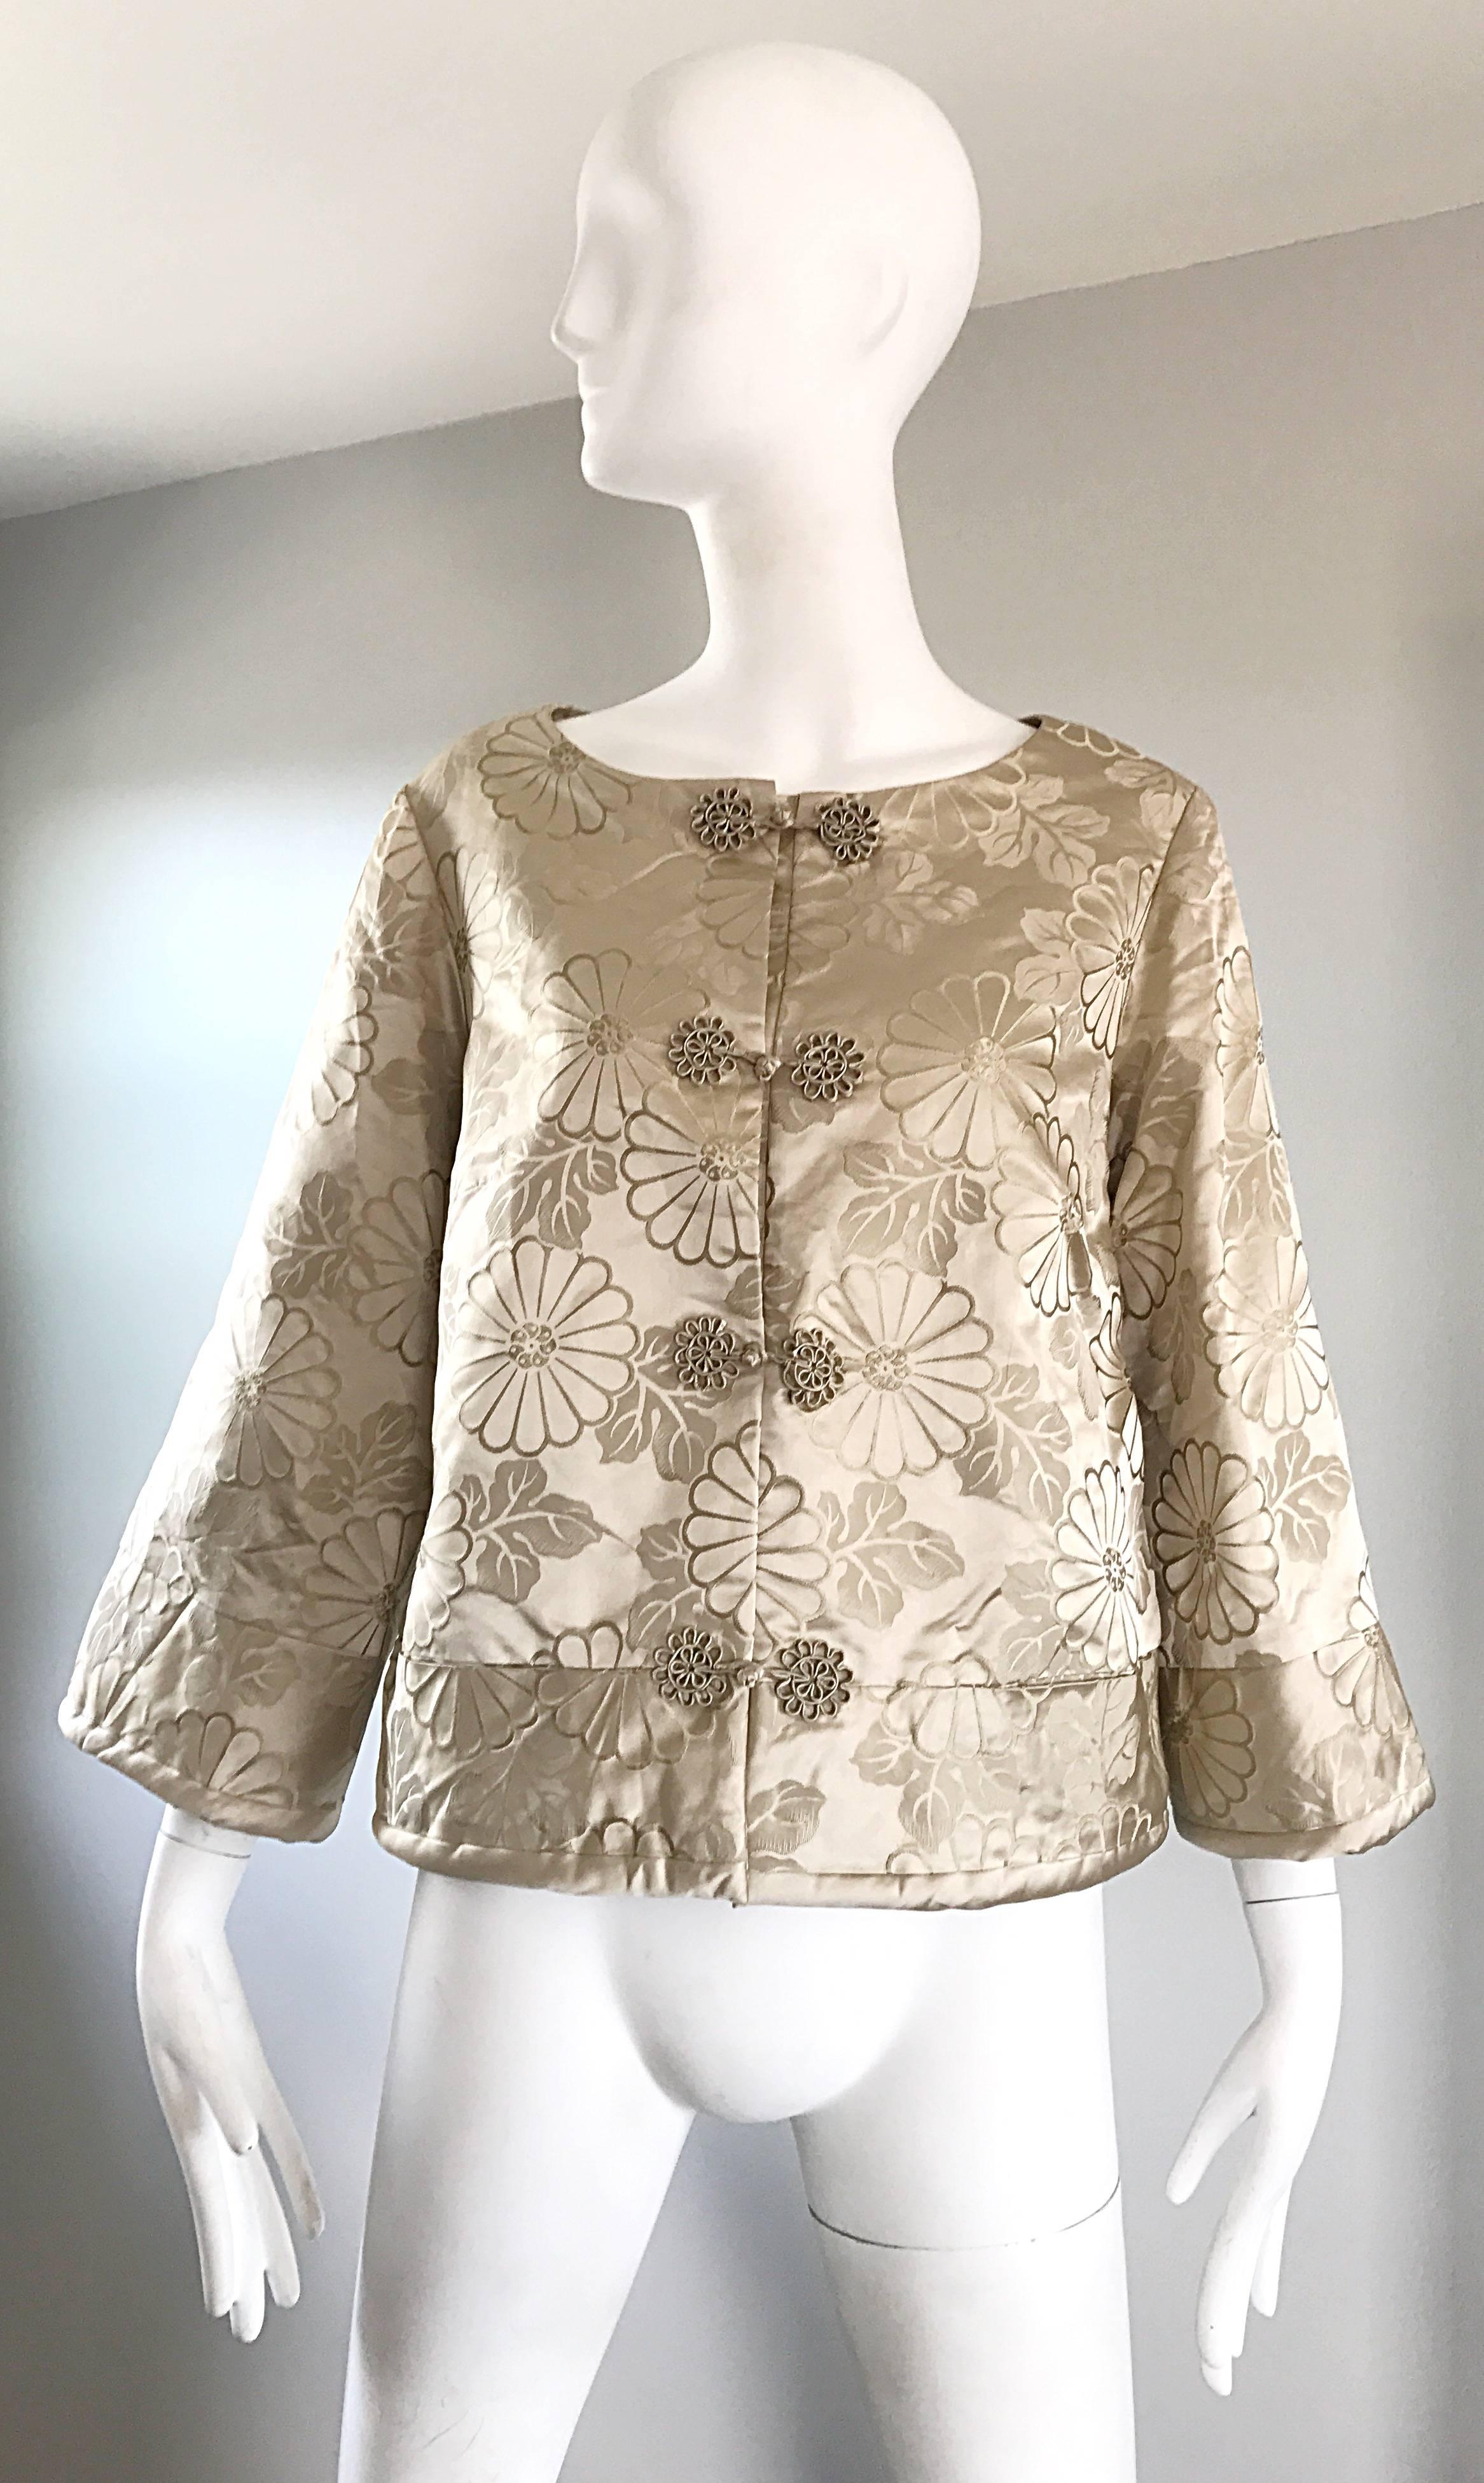 Stunning 1960s DYNASTY beige silk Asian swing jacket! Luxurious soft silk holds shape nicely. Chic bell sleeves. Knotted silk buttons up the bodice. Has a pocket on each side of the waist. Can easily be dressed up or down. Great with jeans,